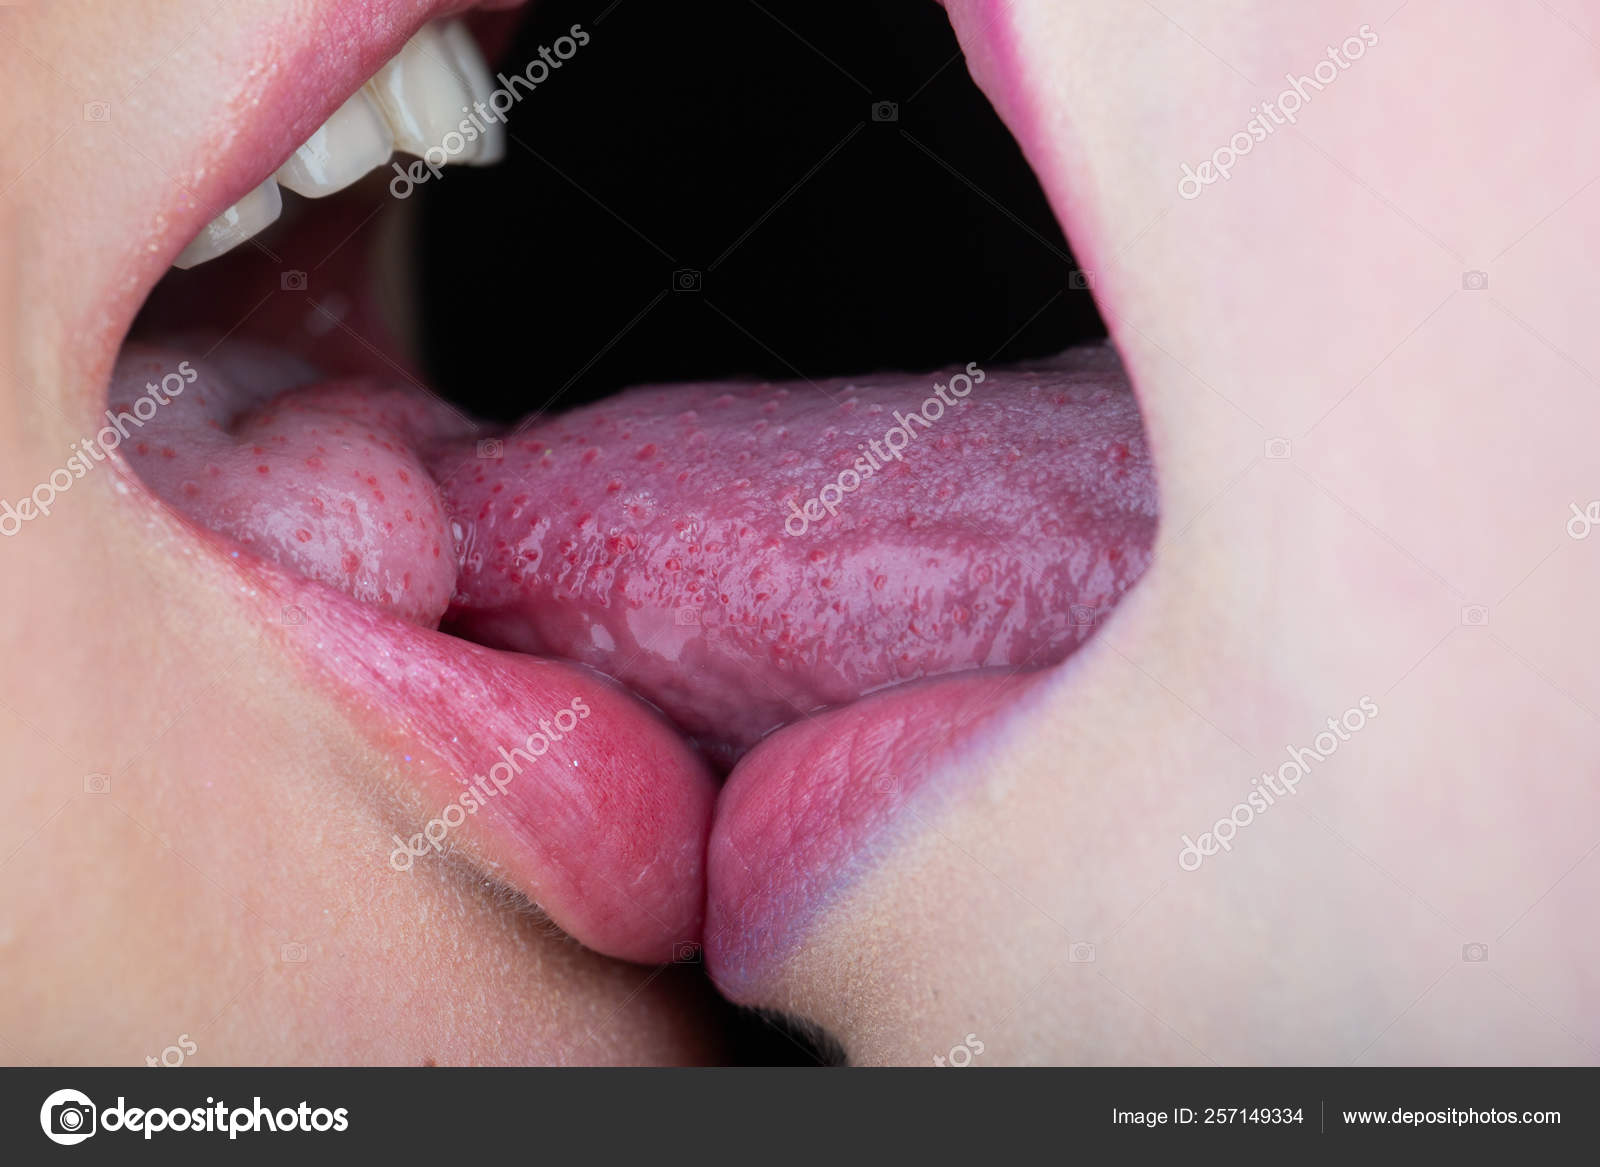 Lesbian kiss tongue. Girls kiss each other with tongue. Tender love. Sexy  mouths together. Two girls during sex. Homosexual passion. Passion and  seduction. Sensual intimacy. Stock Photo by ©hannatv 257149334